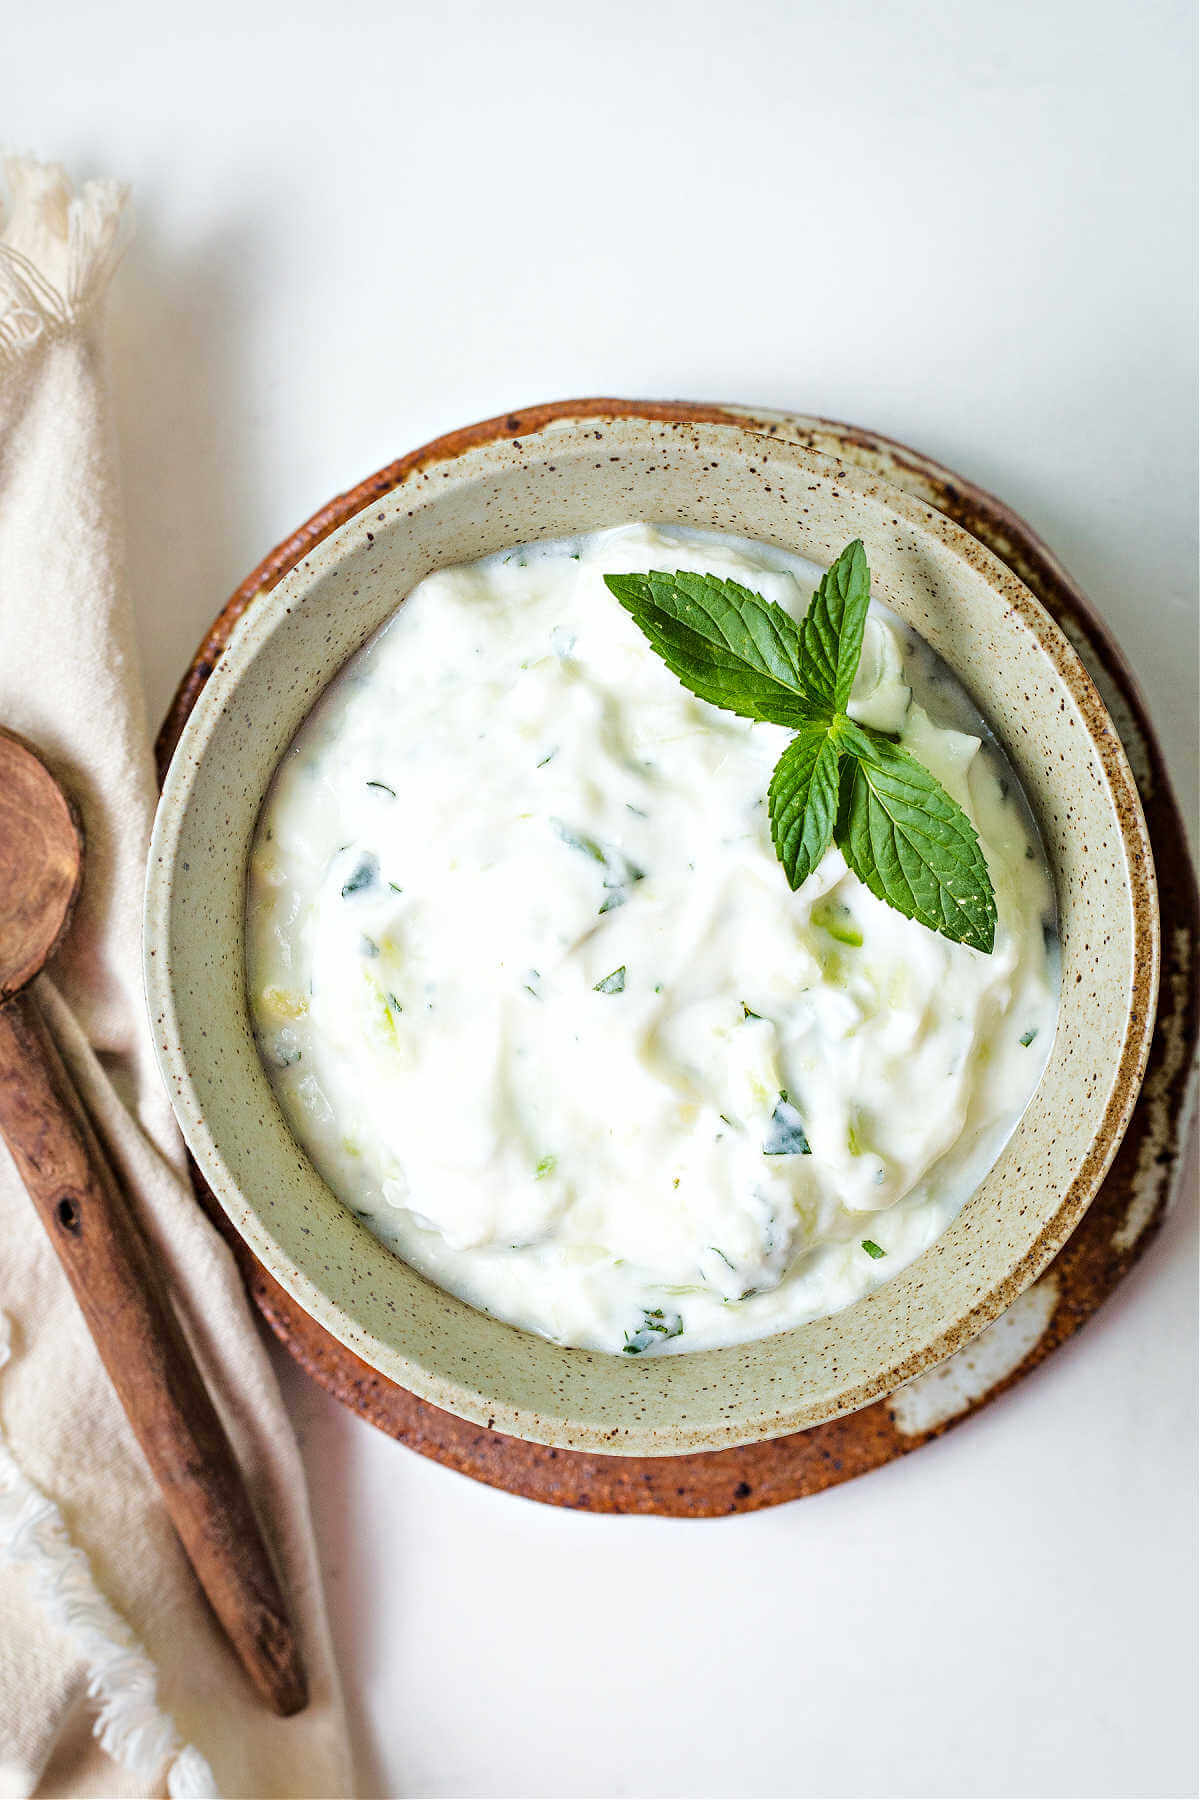 tzatziki sauce in a bowl with a mint sprig garnish with a linen napkin and wood spoon on a table.